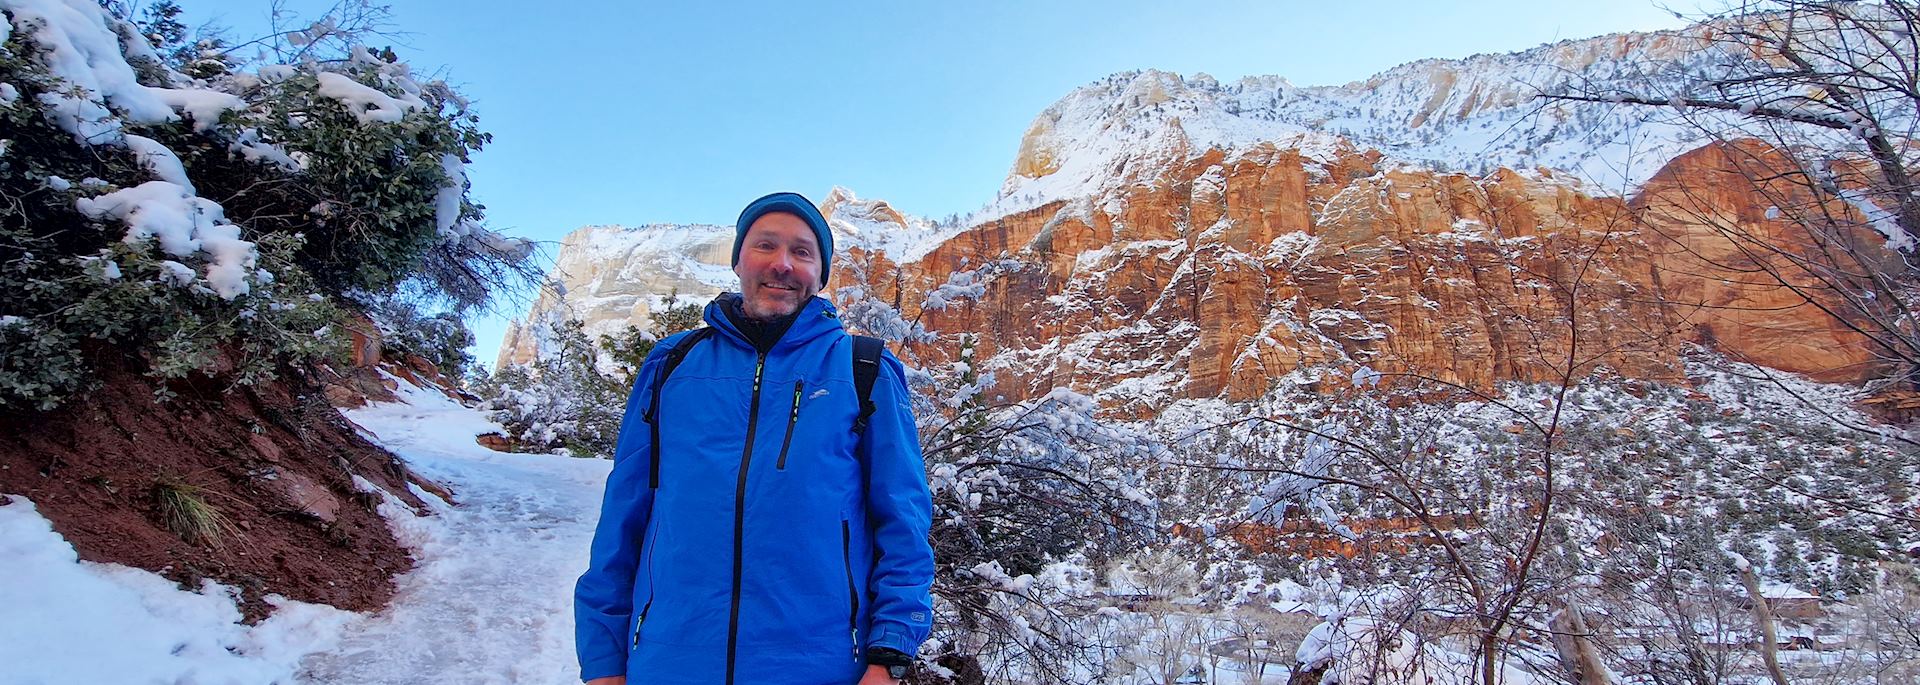 Tom in Zion National Park, USA